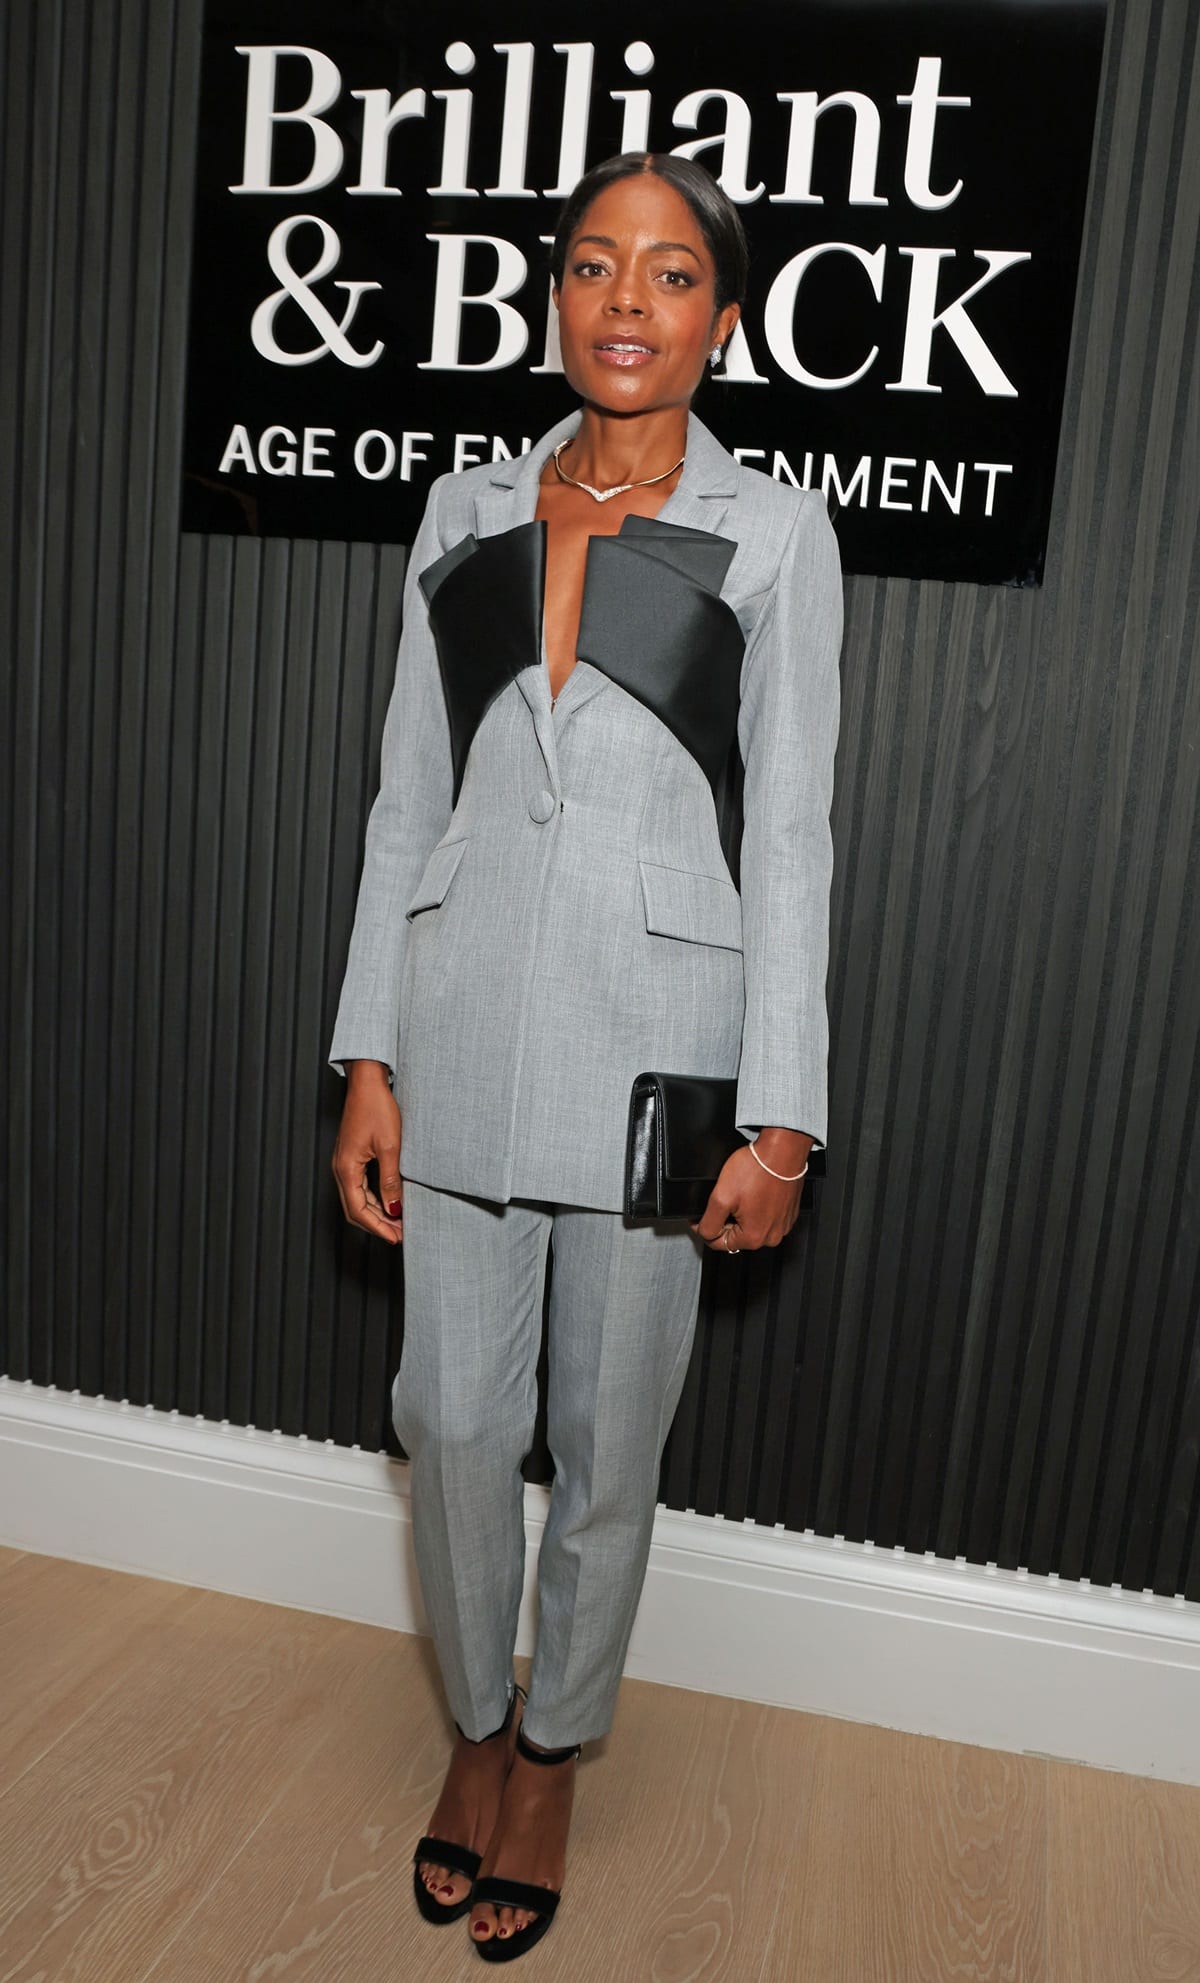 At 5ft 7 (170.2 cm), Naomie Harris radiated elegance in a tailored grey suit during the preview cocktail reception for 